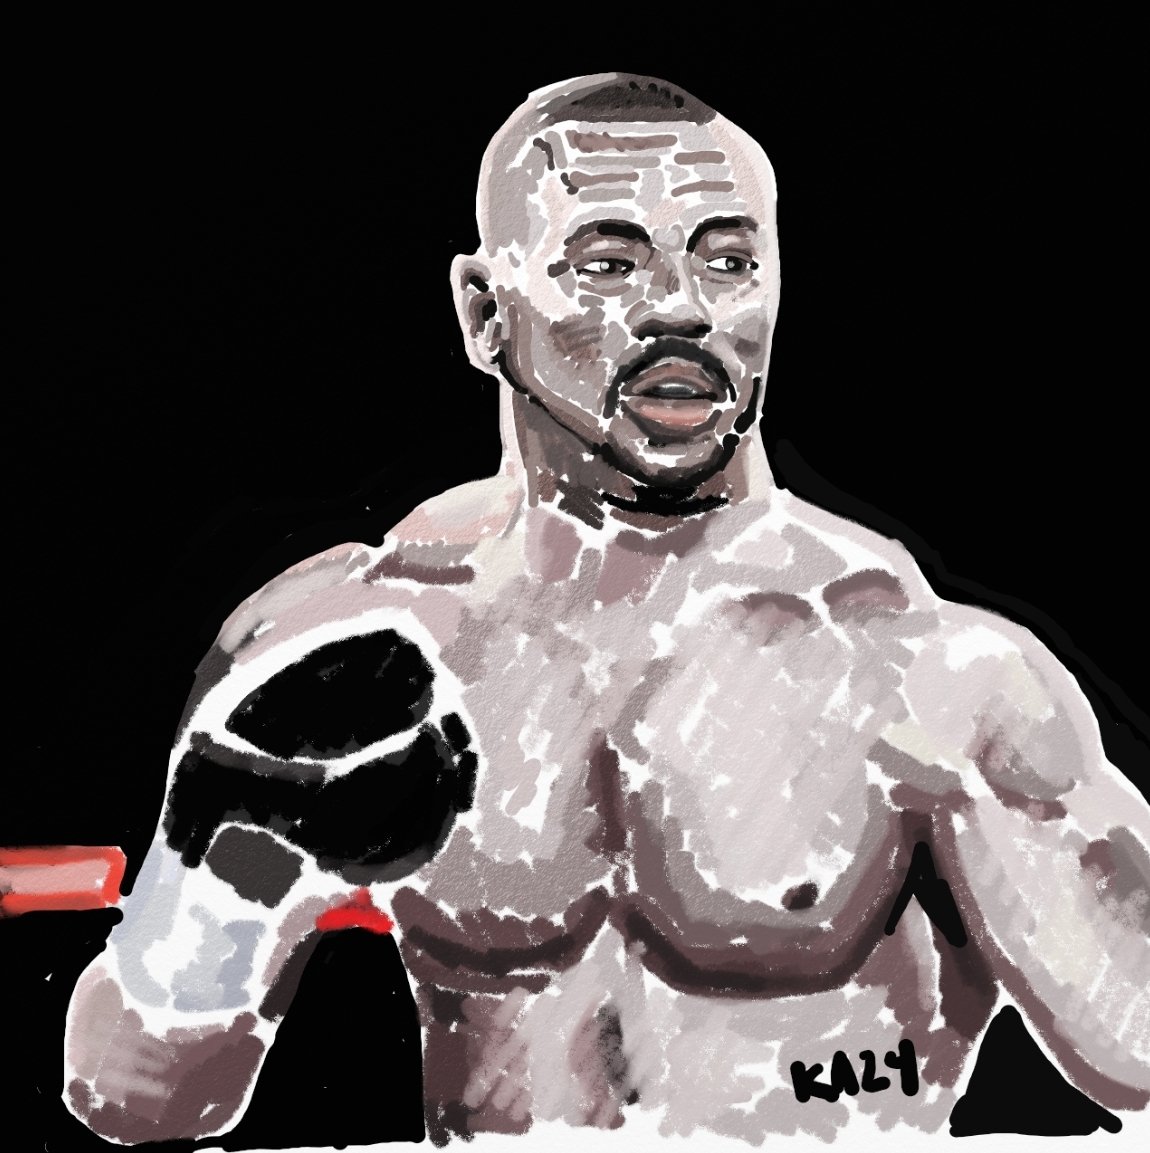 I had the pure pleasure of meeting all-time great @RealRoyJonesJr What a nice guy too! #fanart #boxing #boxingdoodles #artrage #goats #royjonesjr #middleweight #supermiddleweight #lightheavyweight #heavyweight #4divisionchamp #ArtistOnTwitter